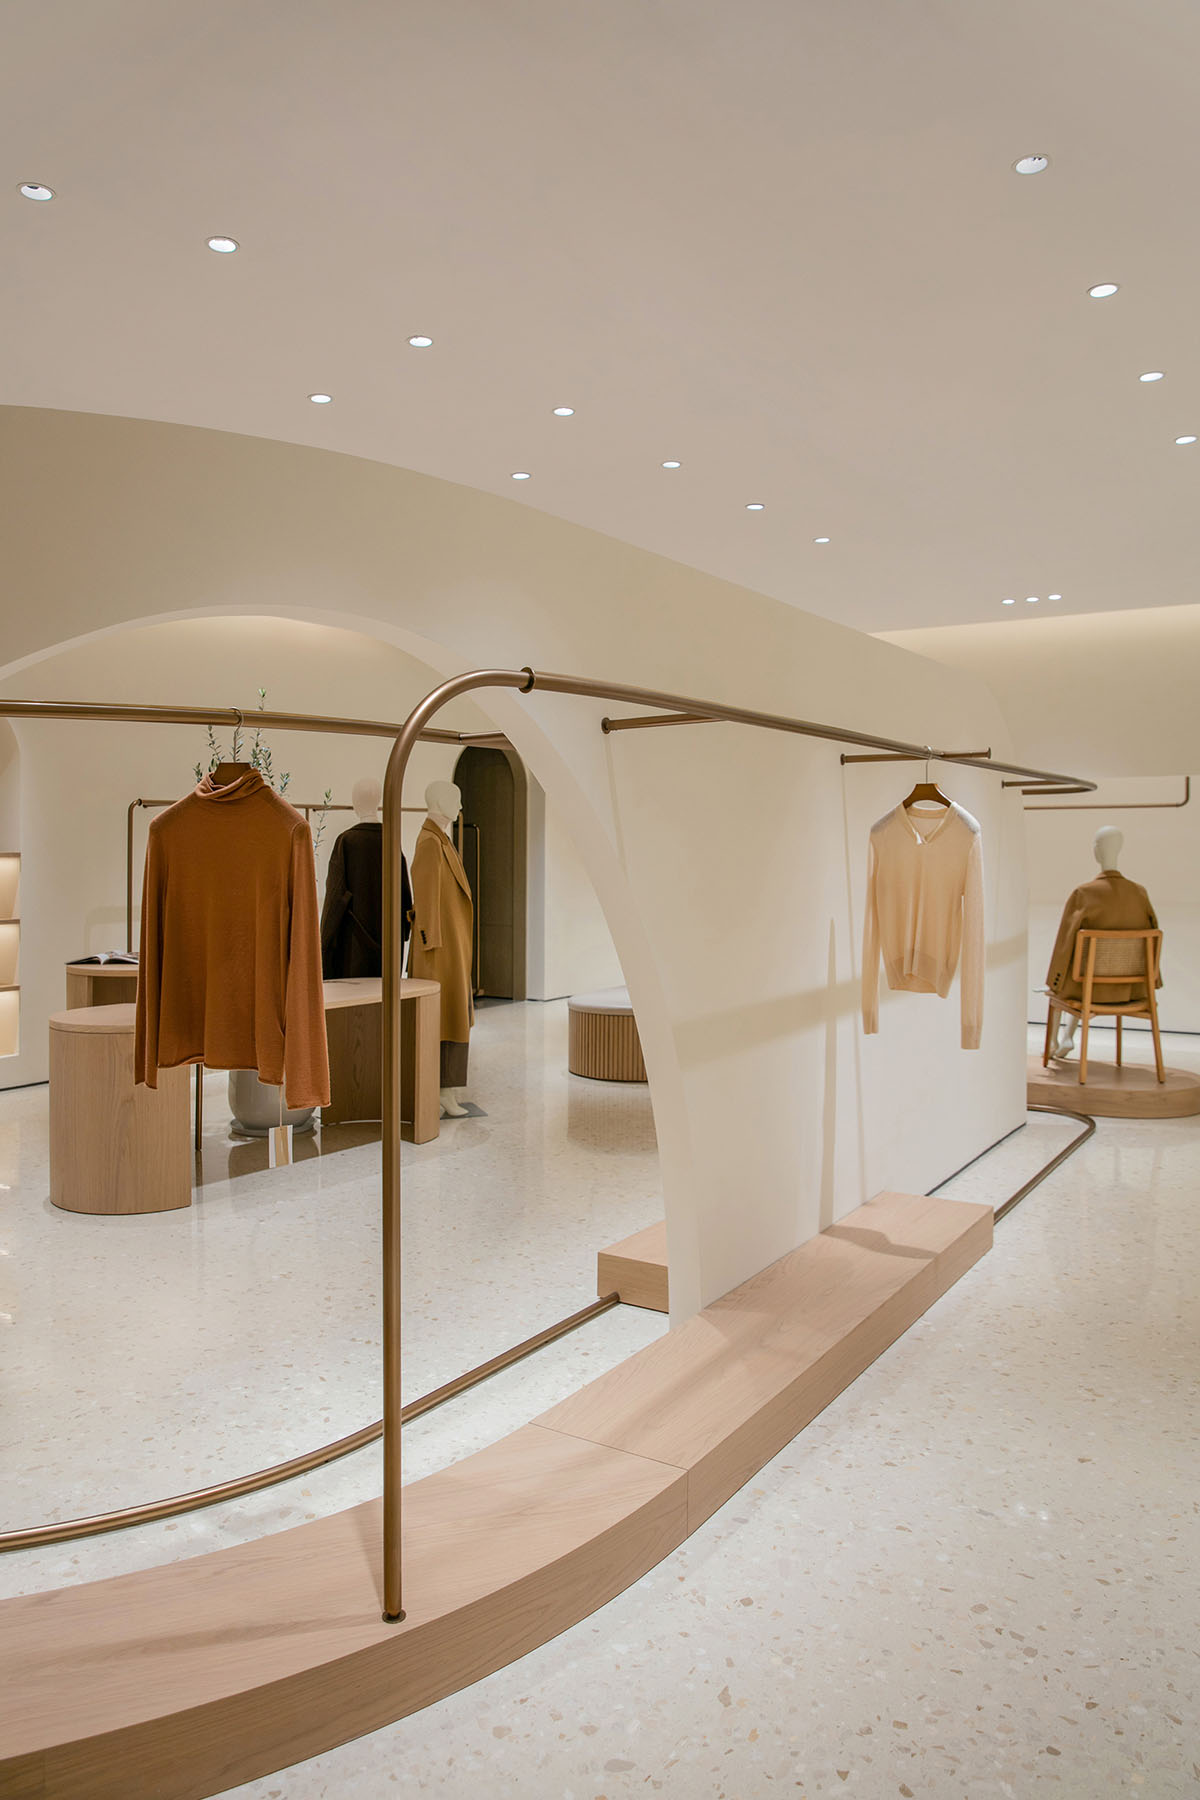 JYDP designs retail space with warm tones and curved walls in Shanghai